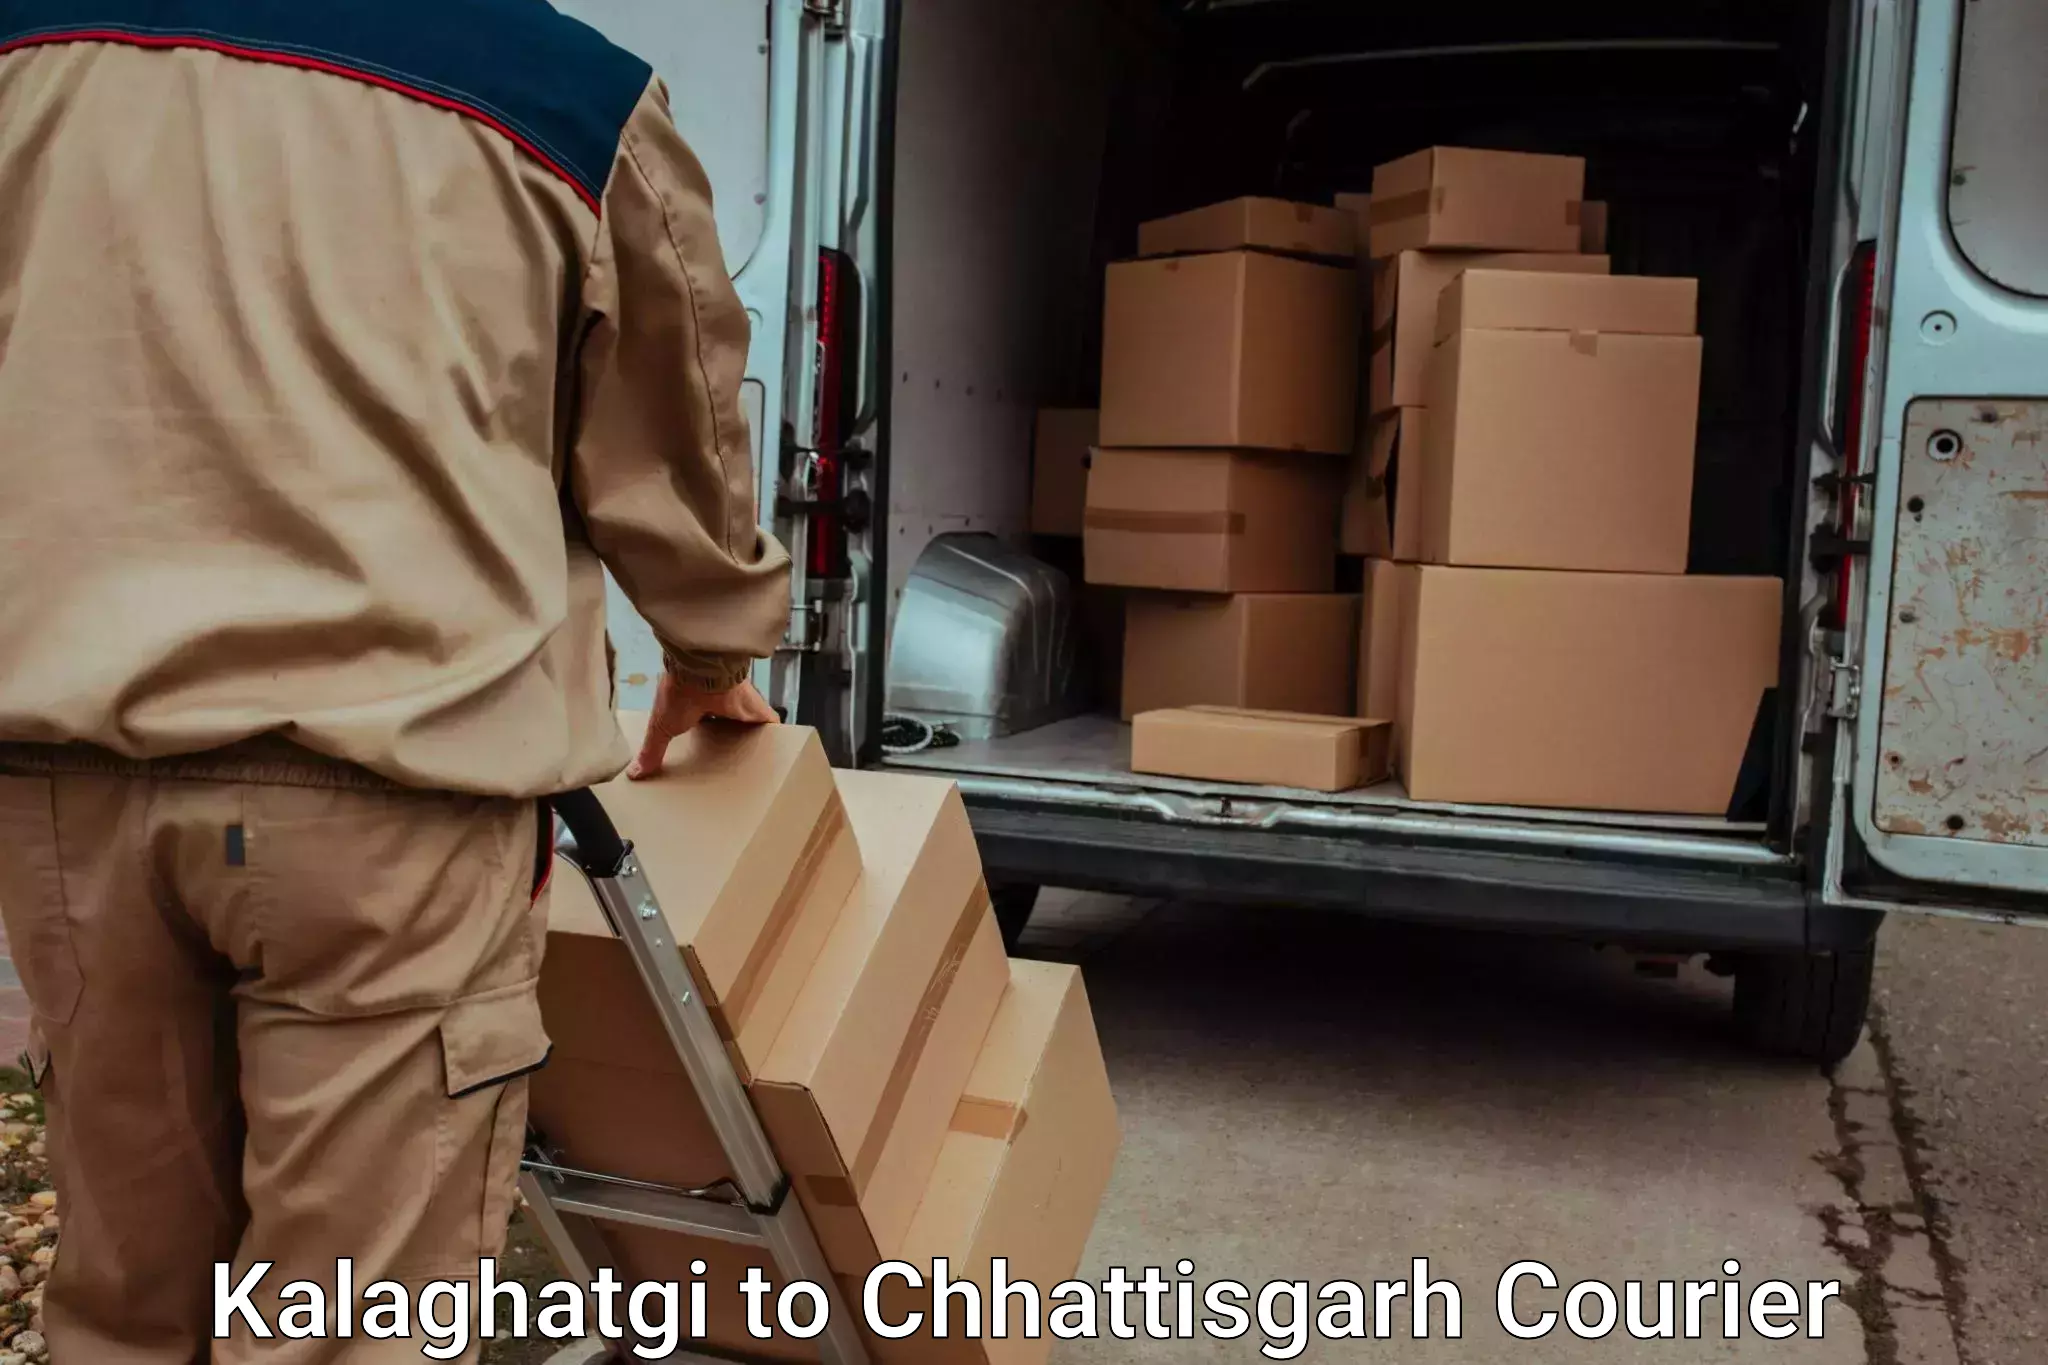 Trusted furniture transport in Kalaghatgi to Raigarh